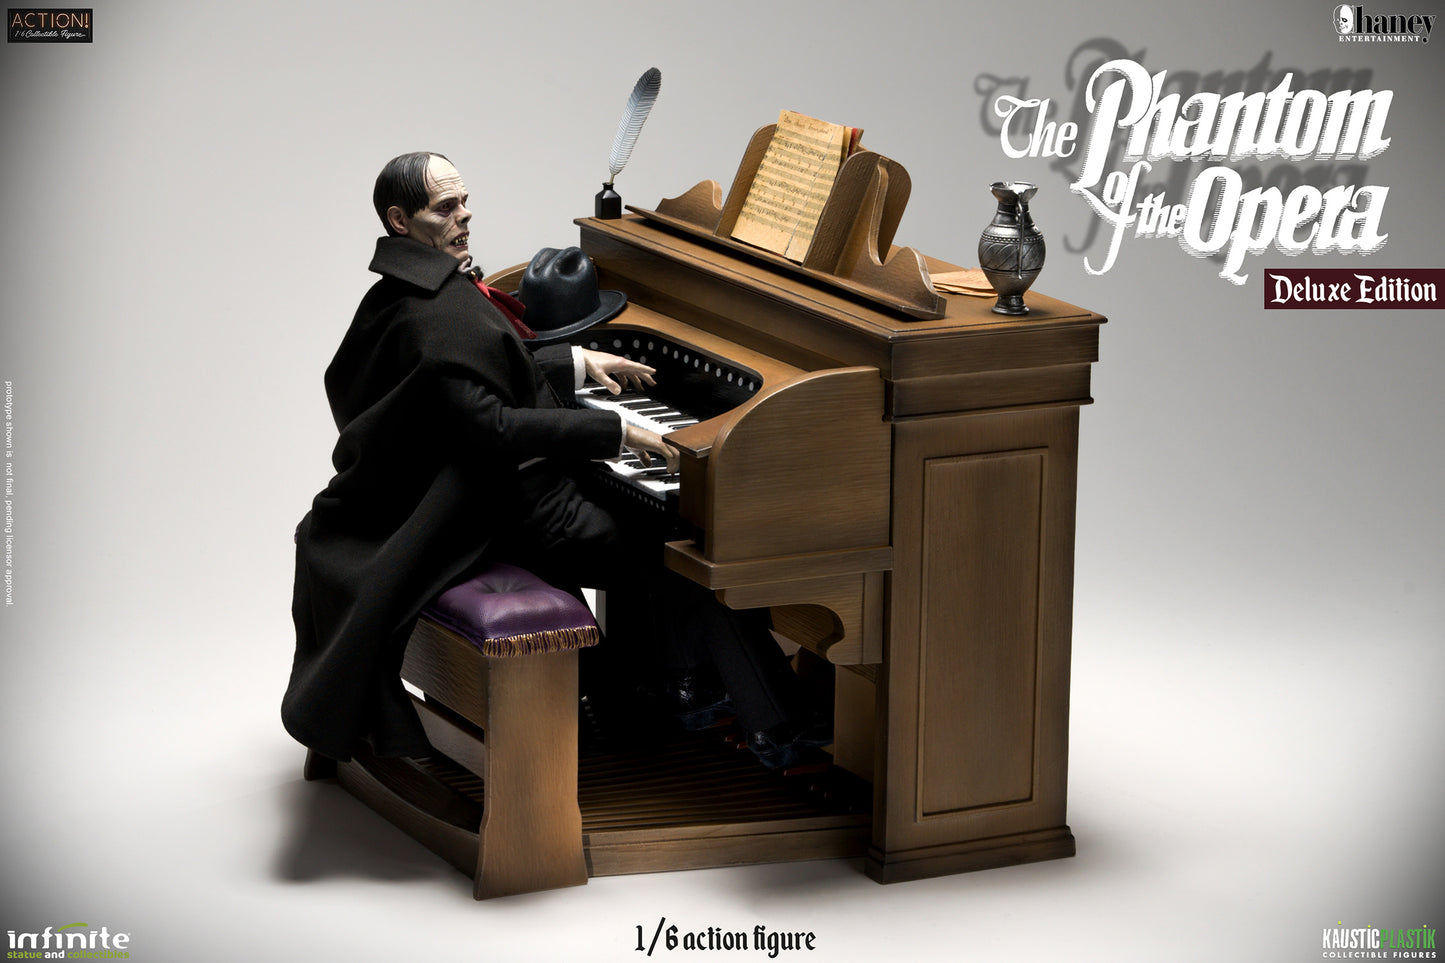 Lon Chaney as Phantom of the Opera Deluxe 1/6 Scale Figure